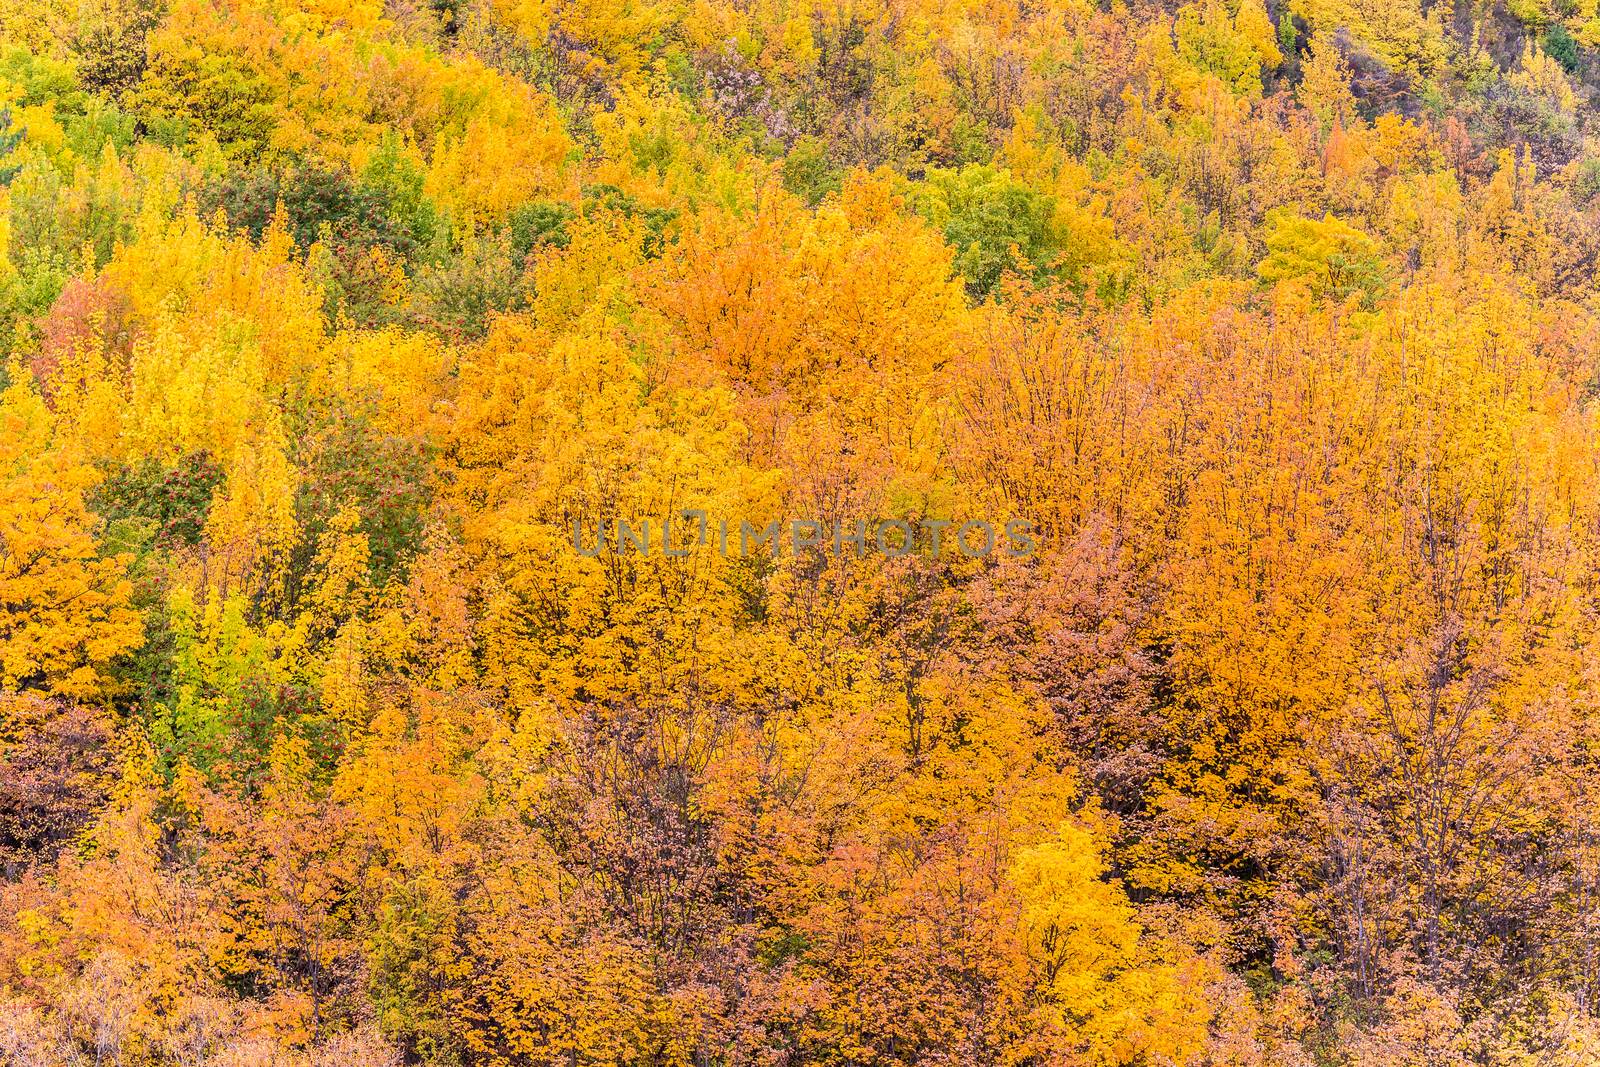 Colorful autumn foliage and green pine trees in Arrowtown, Central Otago, South Island, New Zealand.